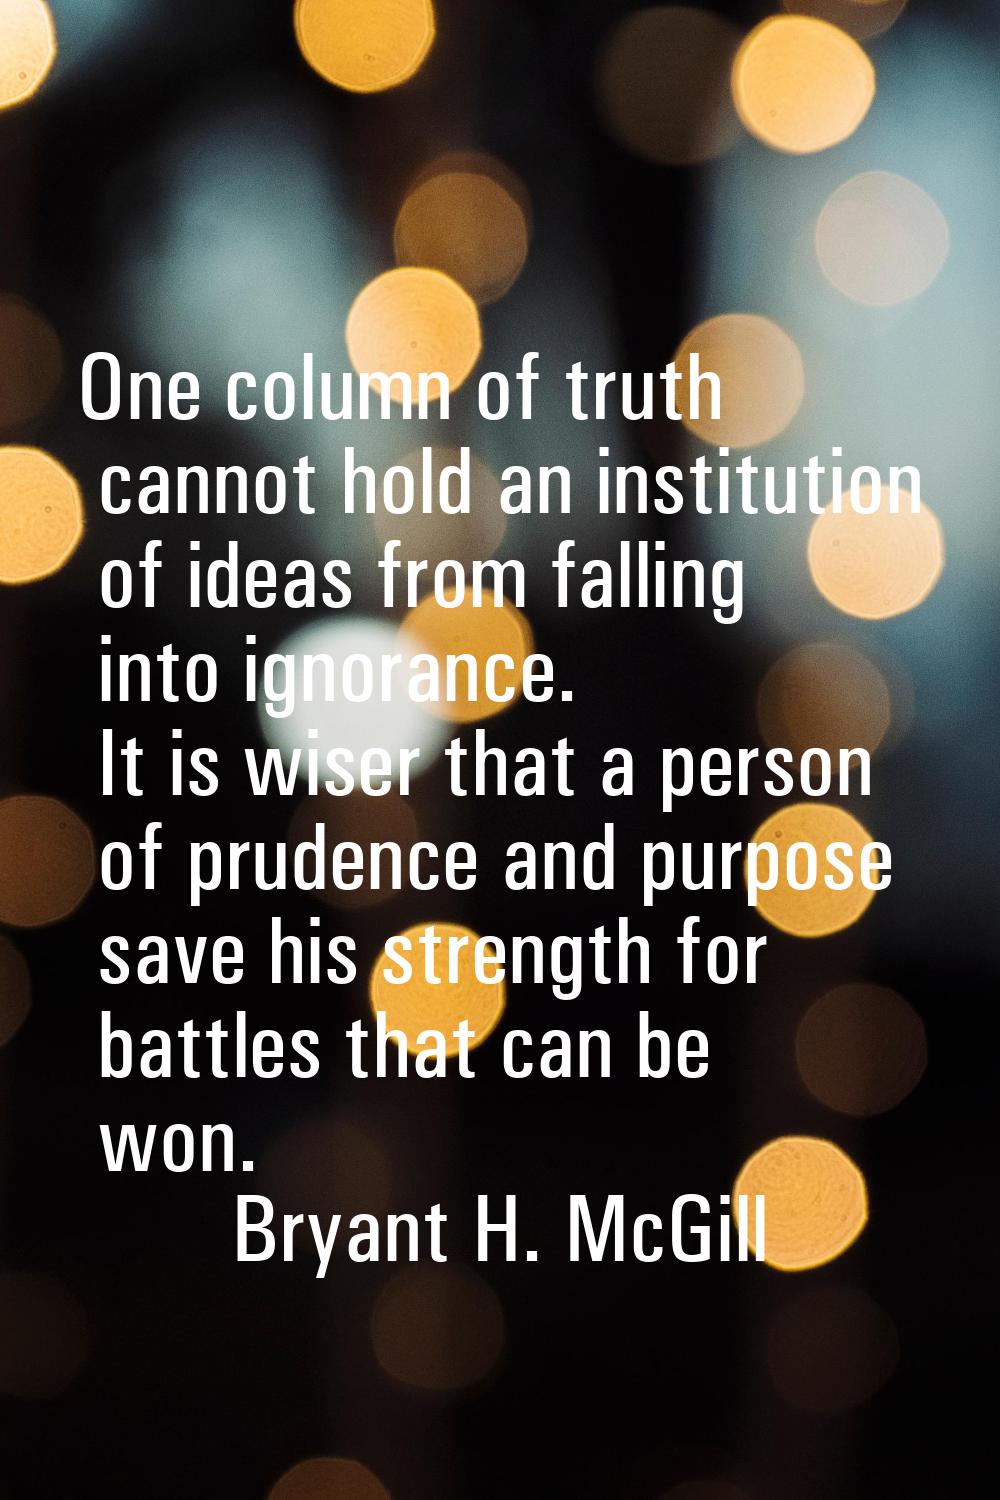 One column of truth cannot hold an institution of ideas from falling into ignorance. It is wiser th